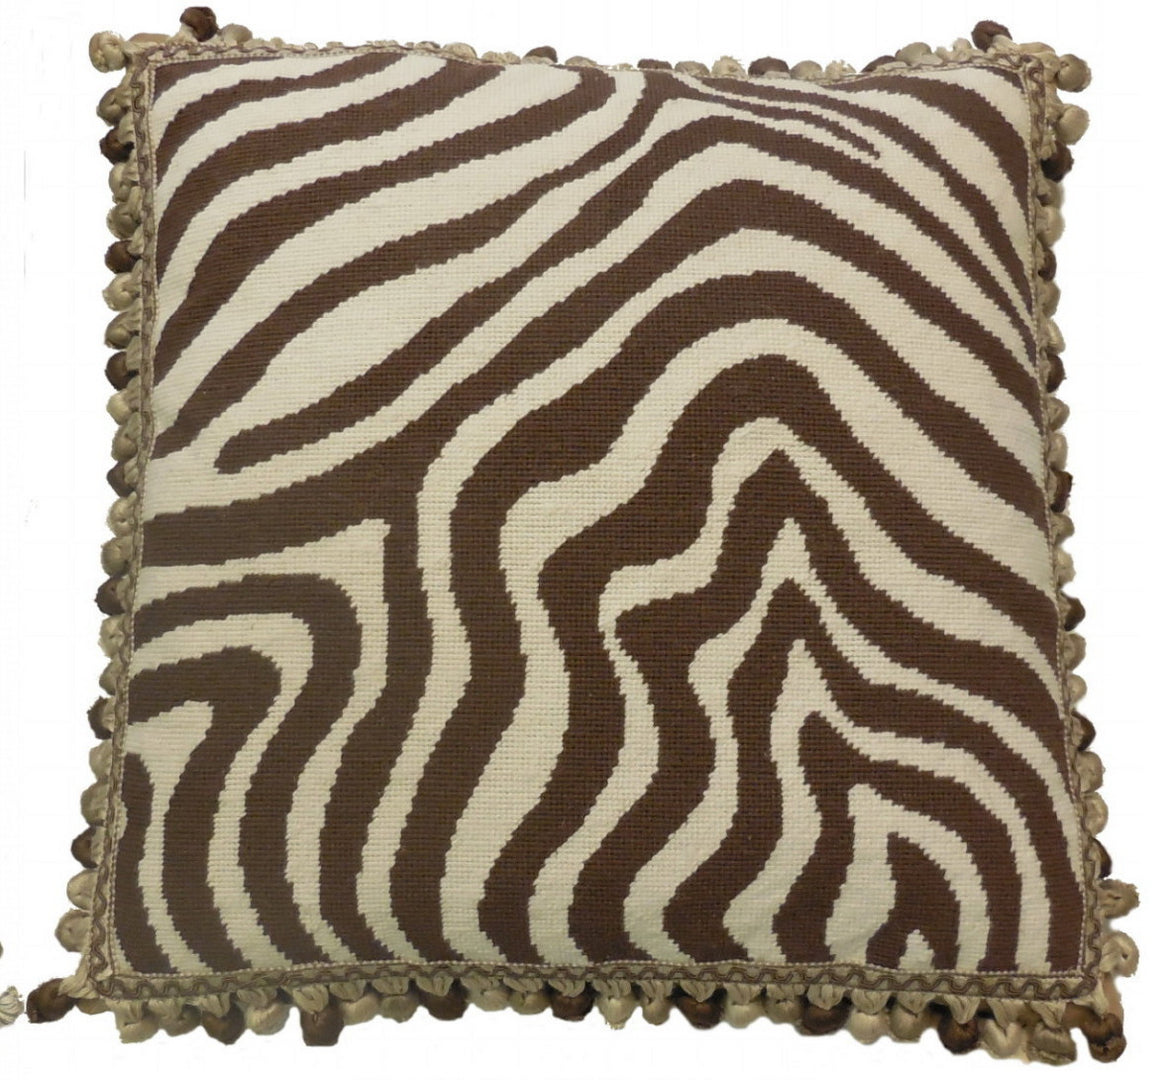 Needlepoint Hand-Embroidered Wool Throw Pillow Exquisite Home Designs tiger brown with 3 color tassels